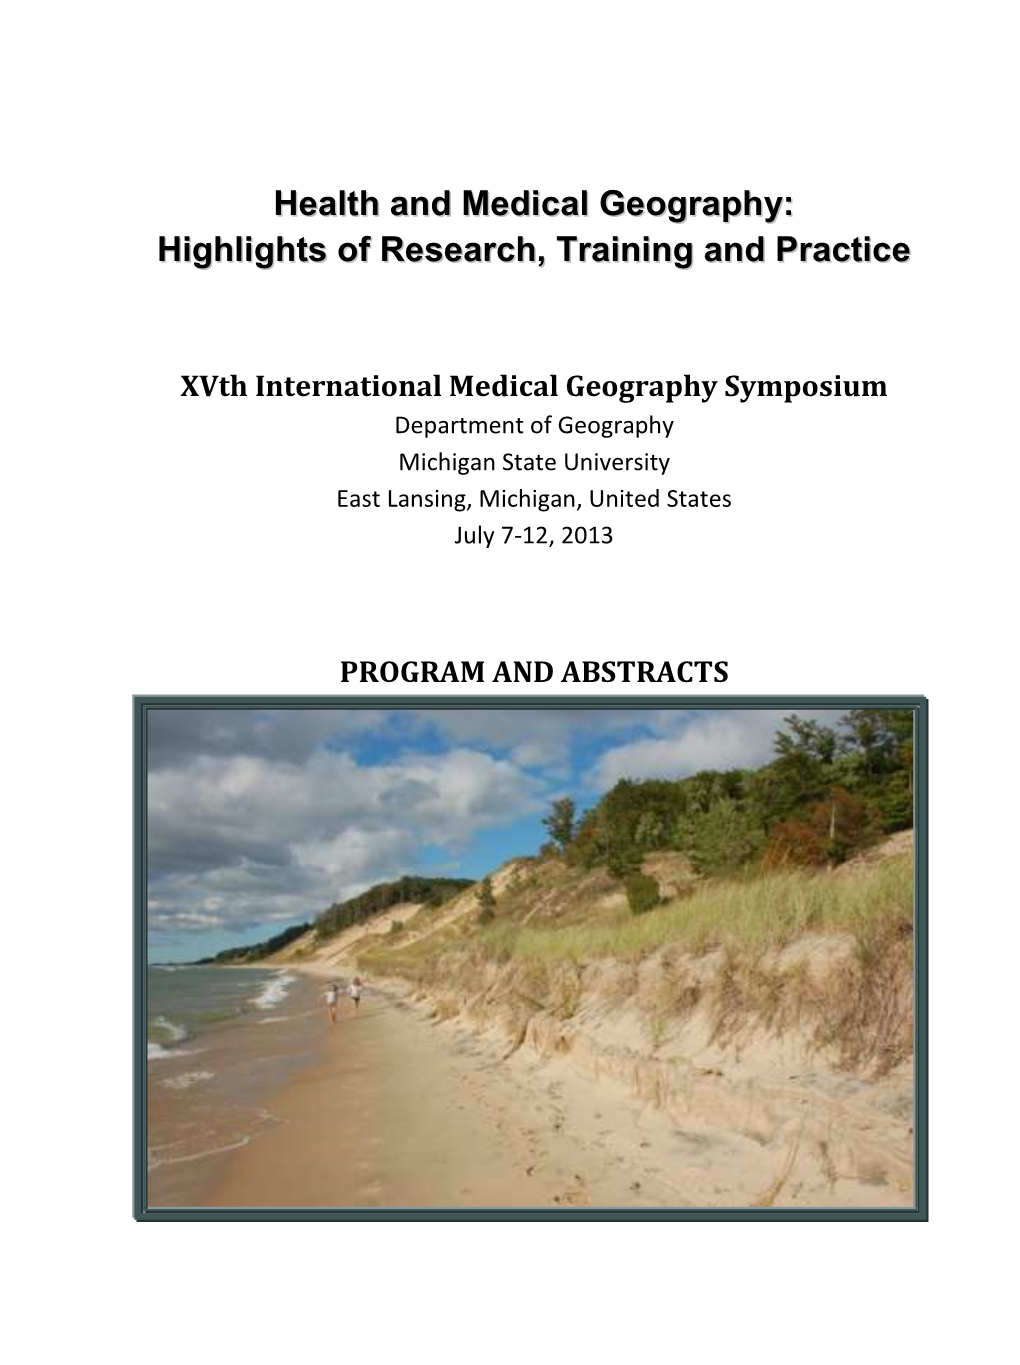 Health and Medical Geography: Highlights of Research, Training and Practice